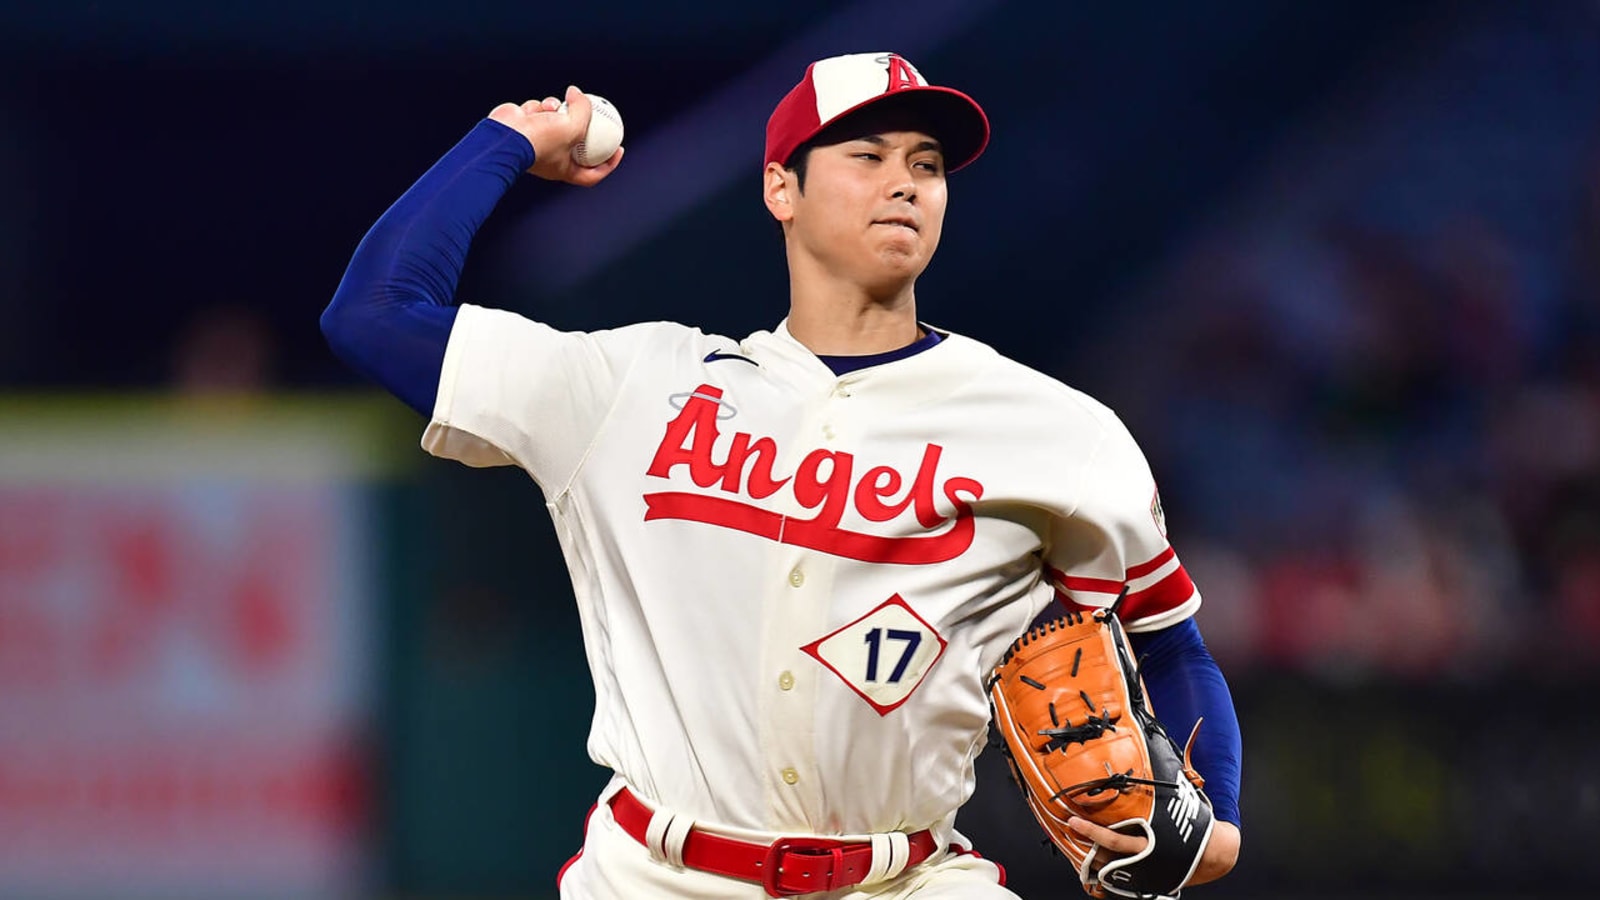 Shohei Ohtani passes Babe Ruth in career strikeouts